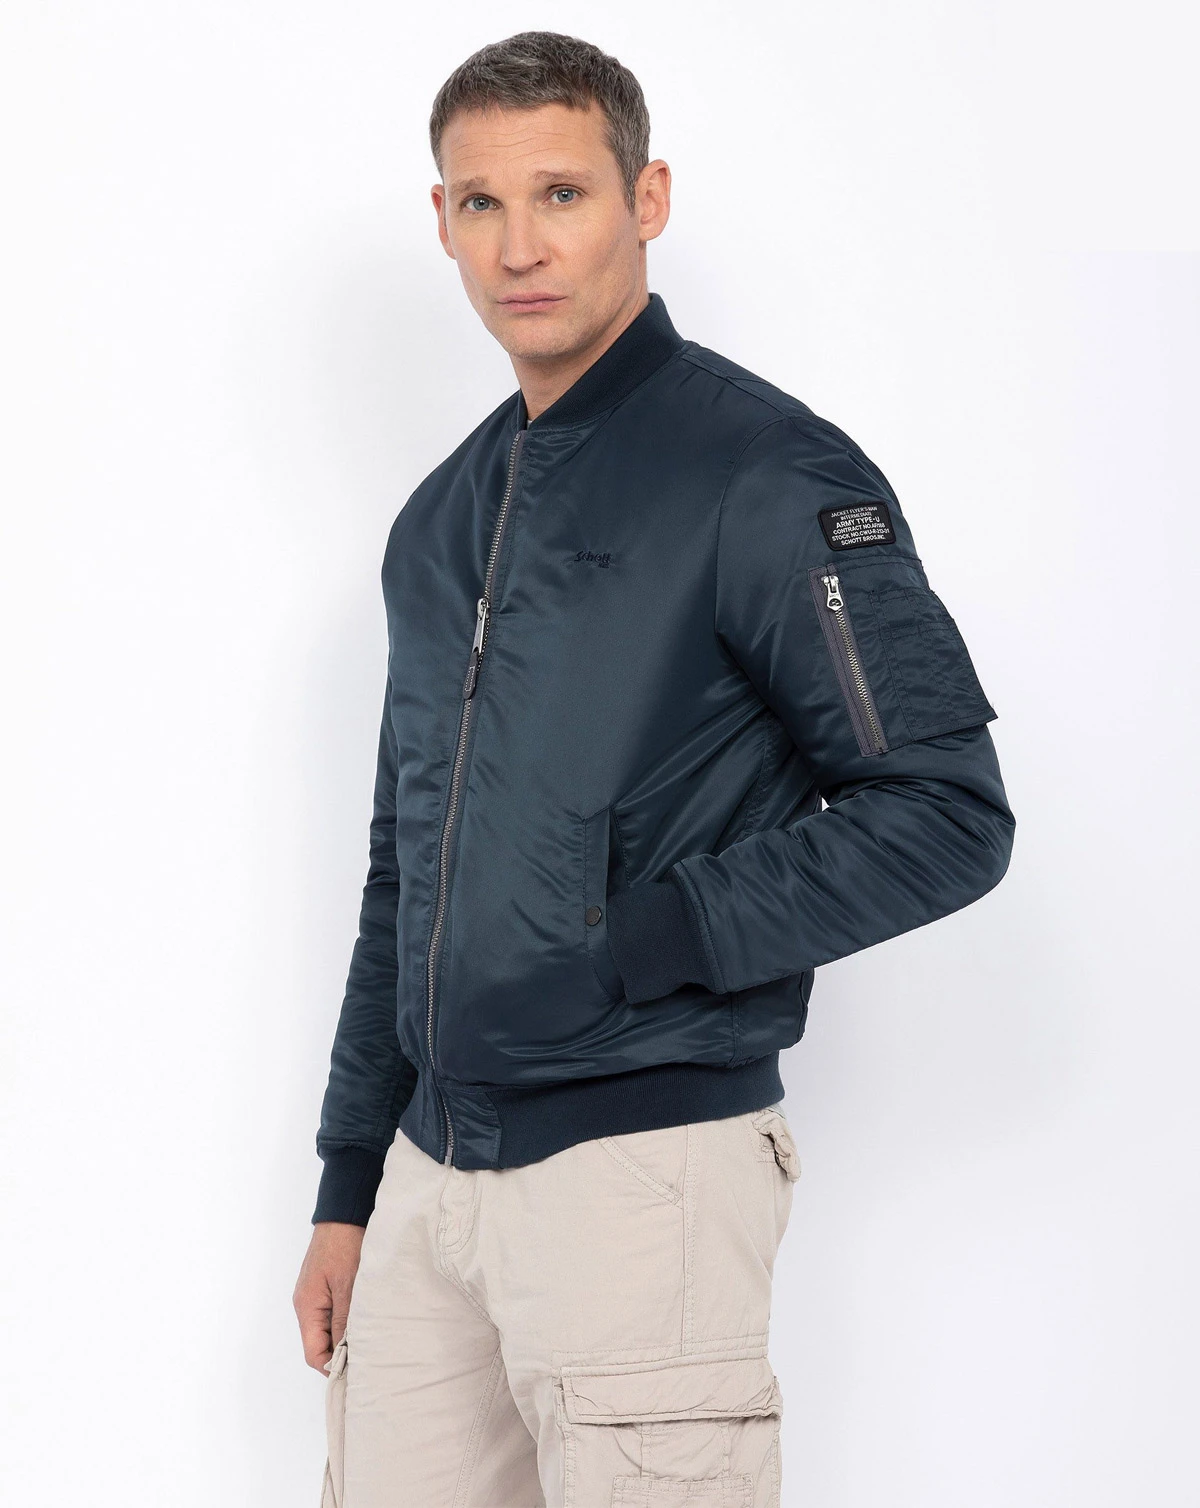 JKFW MA1 Army Air Force Fly Pilot Military Flight Tactical Bomber Jacket :  Amazon.in: Fashion